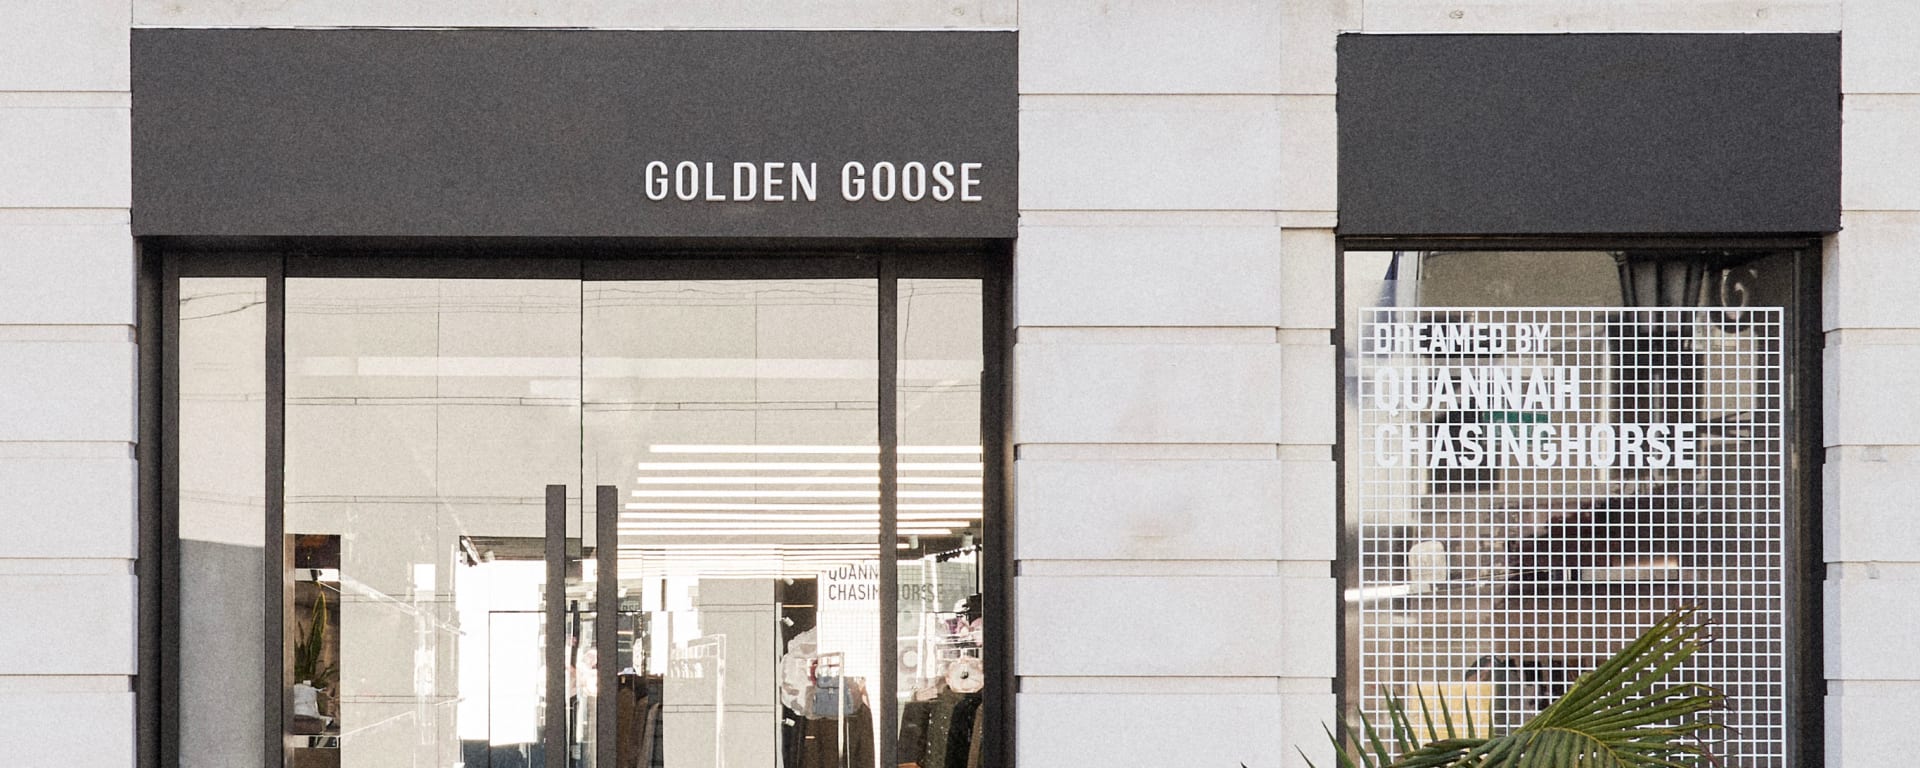 Golden Goose LOS ANGELES FLAGSHIP STORE 1 of 3